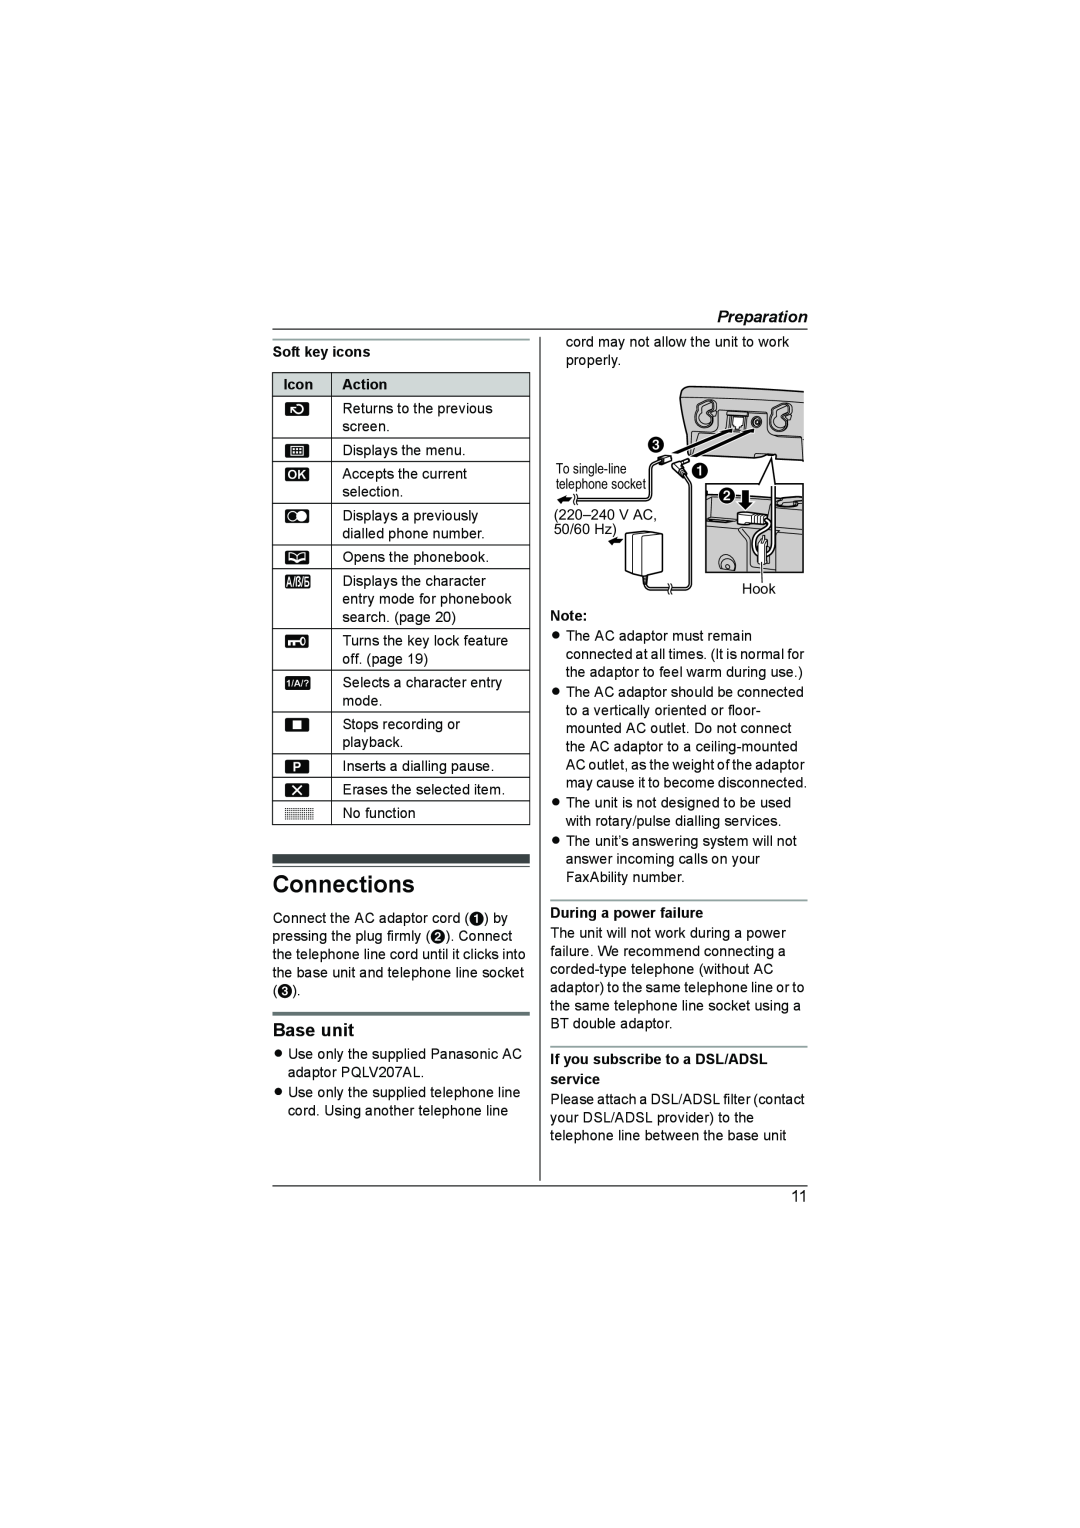 Panasonic KX-TG7341NZ Connections, Base unit, Preparation, Soft key icons, Icon, Action, During a power failure 